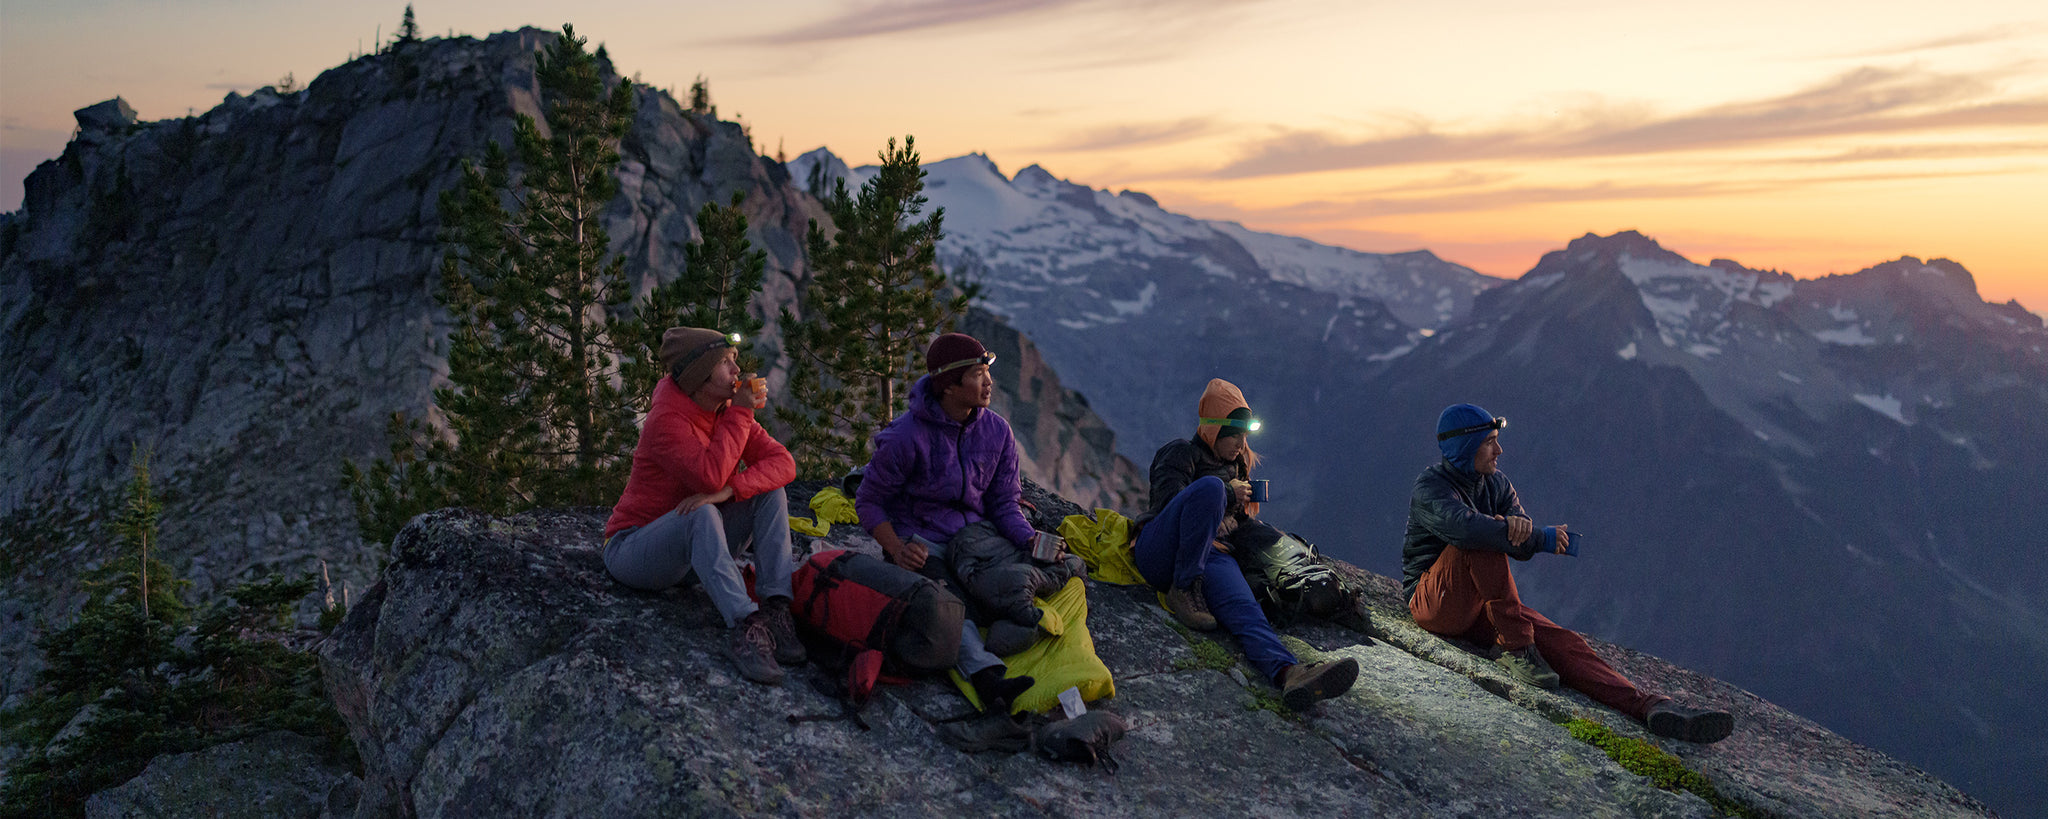 A group of friends watch the sunset while sitting on a rock in the mountains.